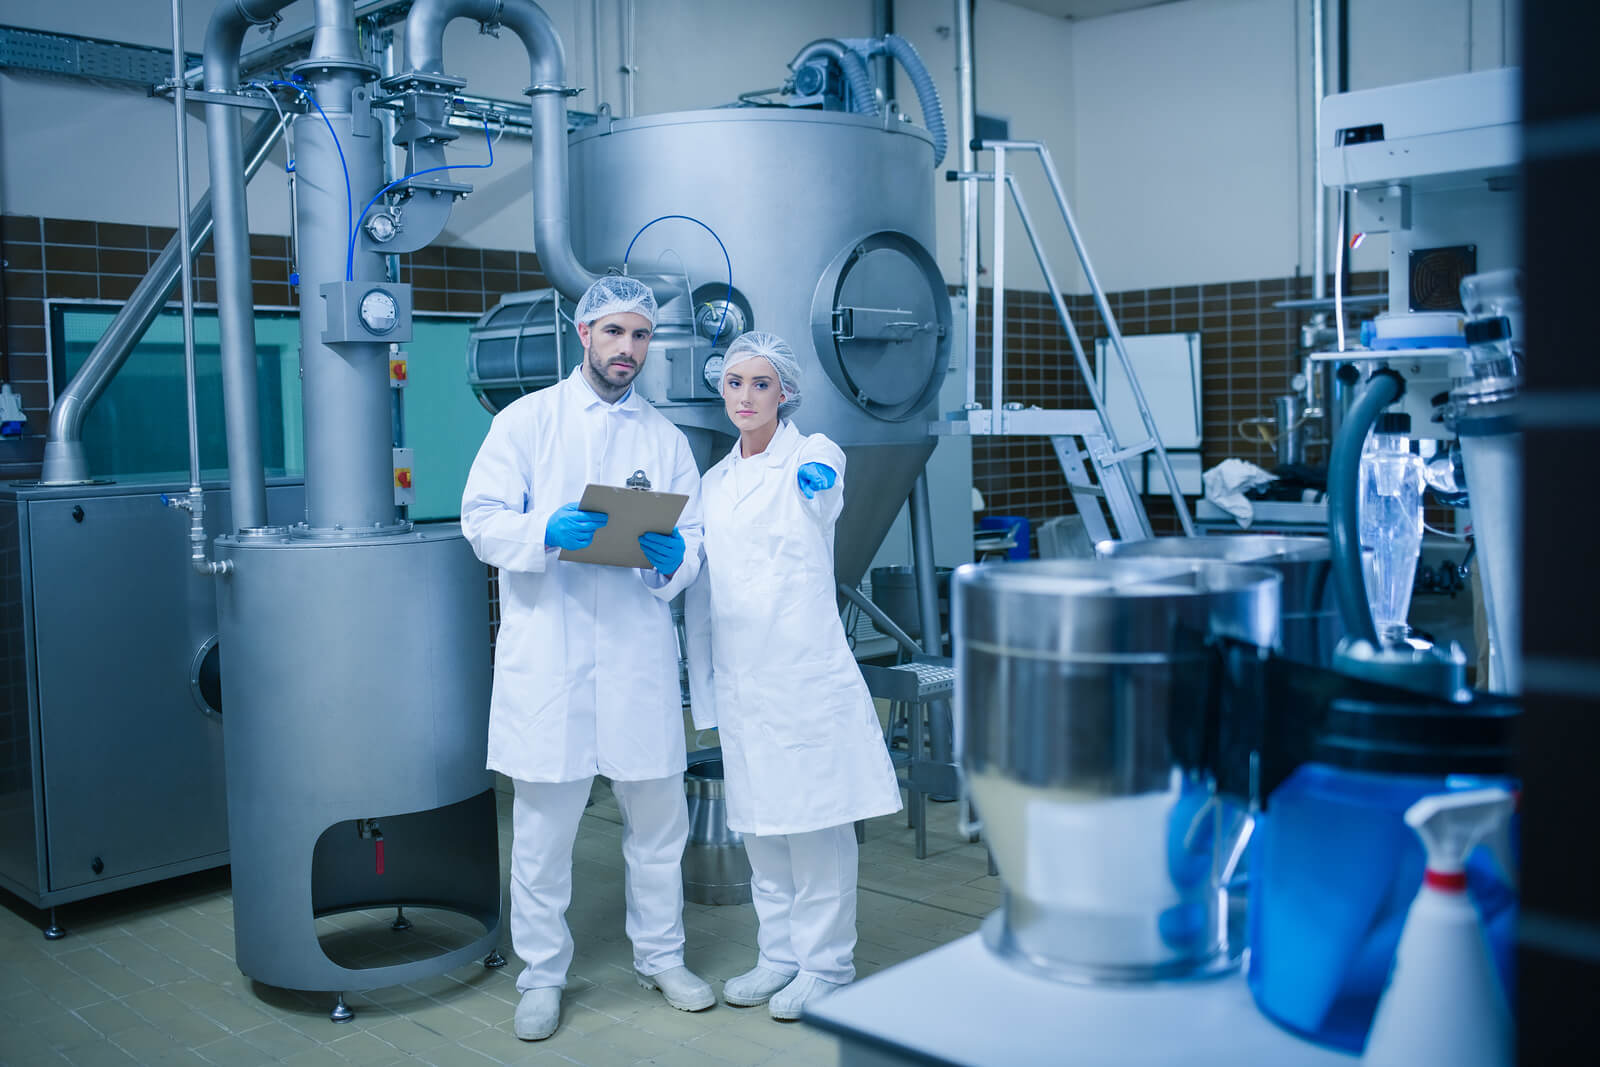 food safety technicians in a plant